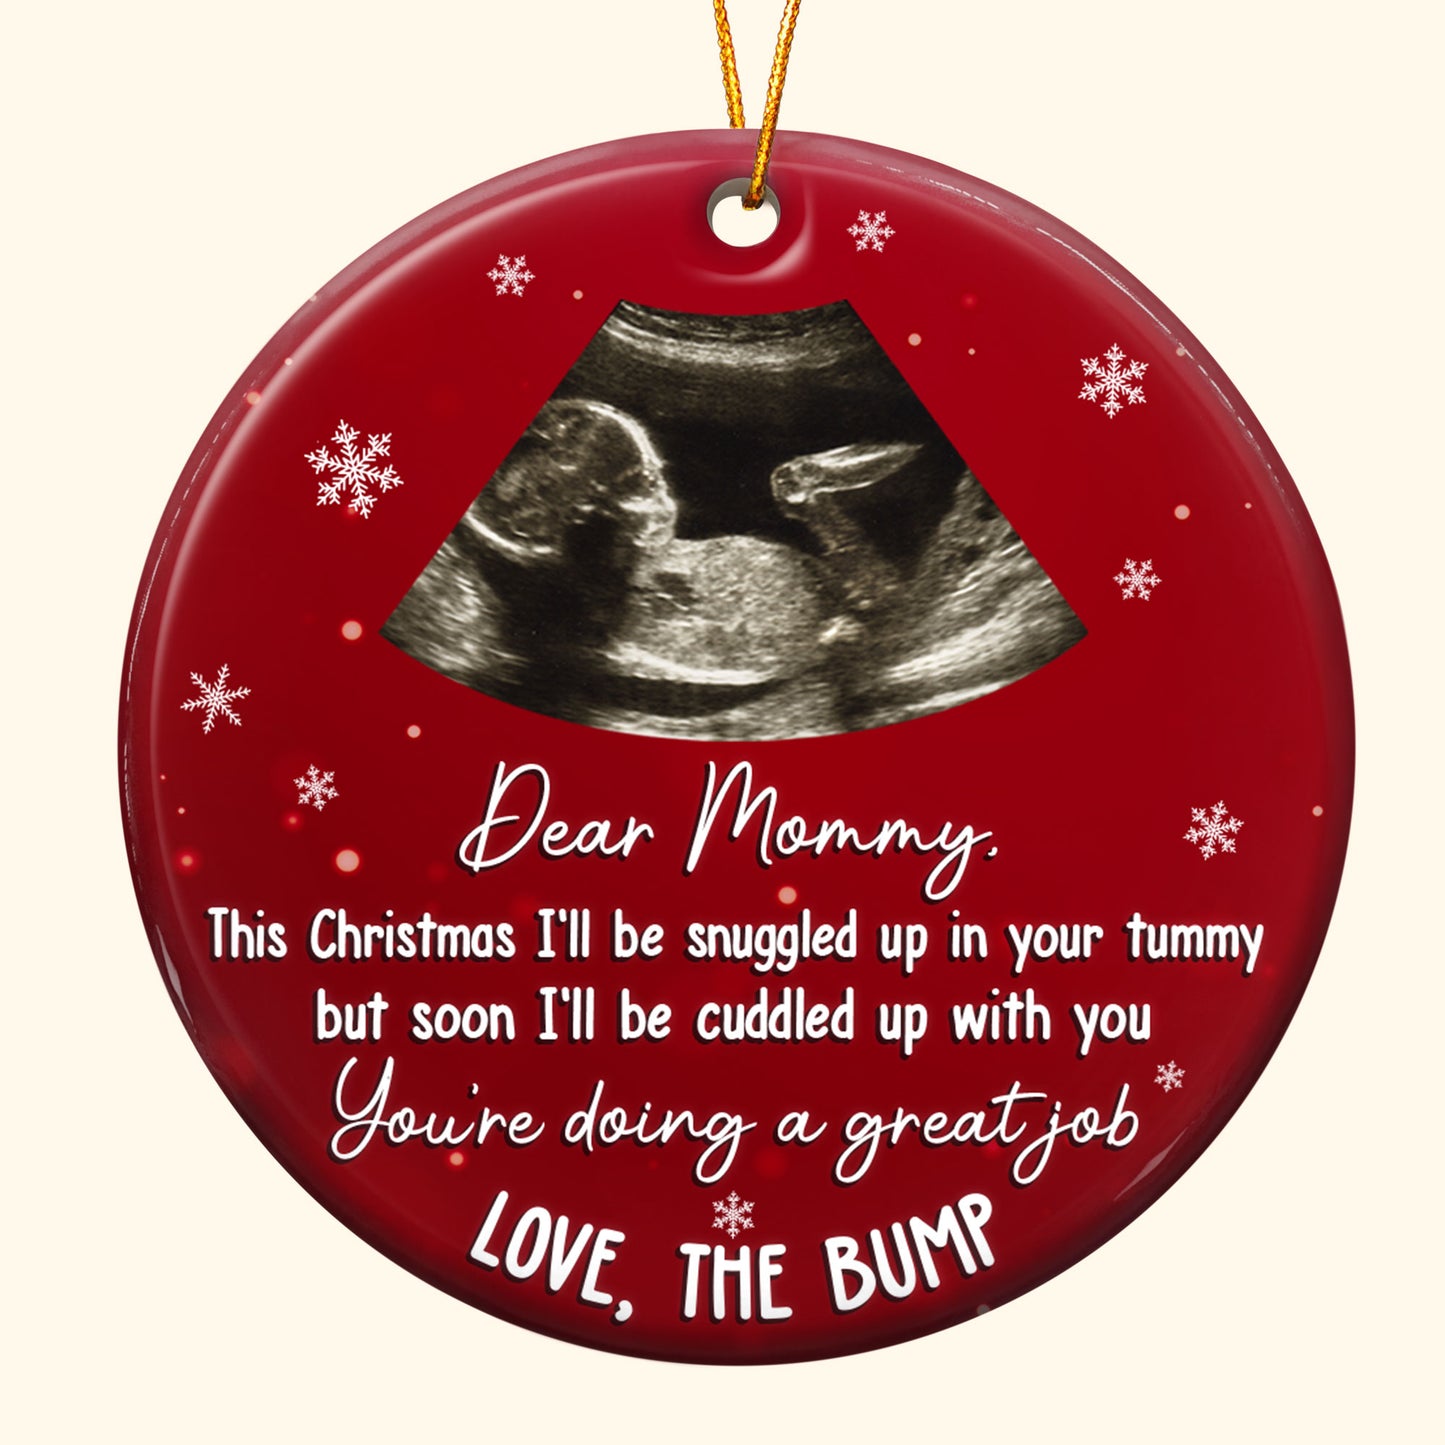 This Christmas I'll Be Snuggled - Personalized Photo Ceramic Ornament